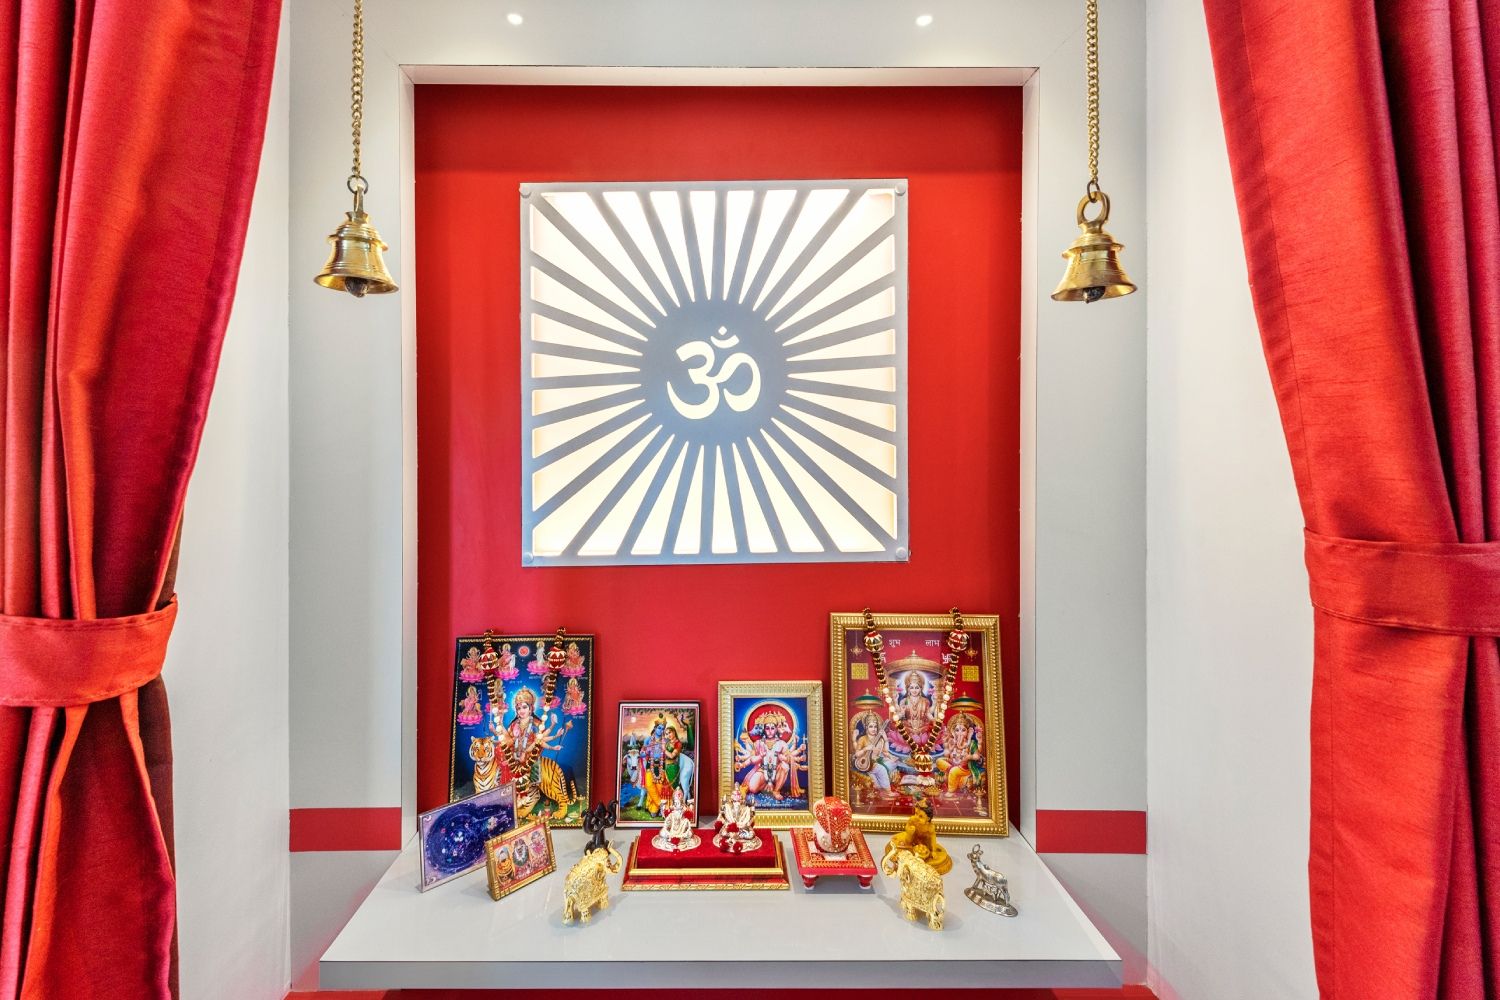 Modern Floor-Mounted Mandir Unit with Cardinal Red Accents And Om Mandala Wall Design